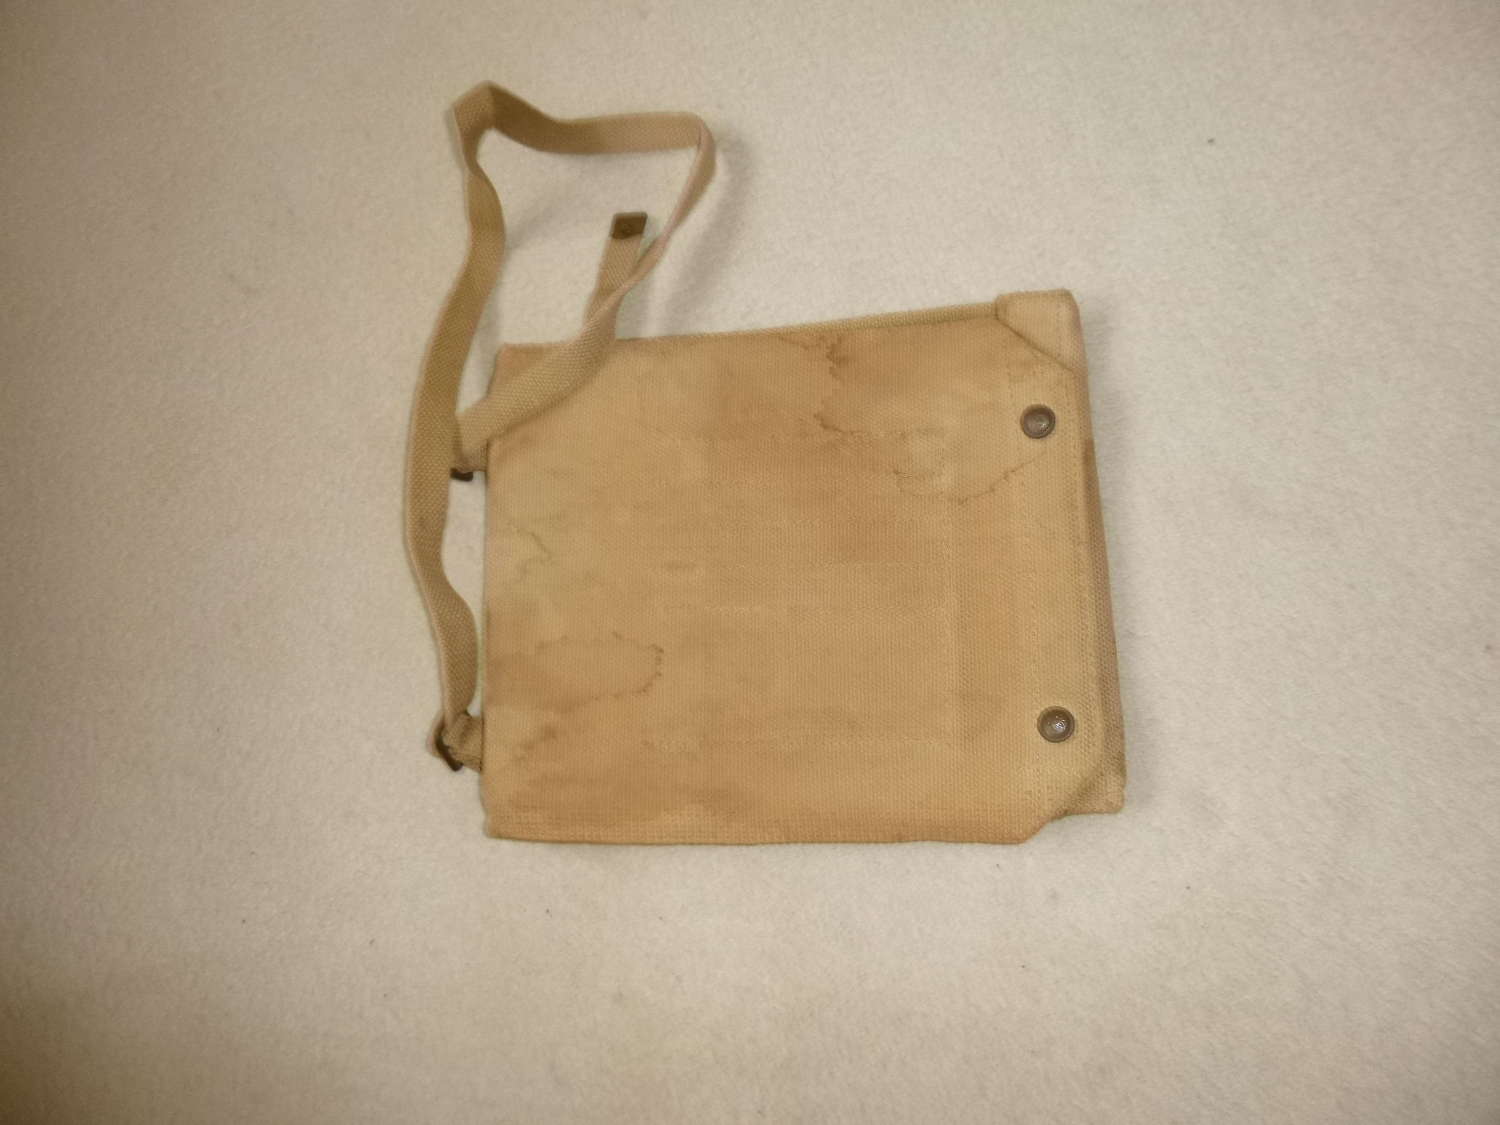 British Army officer's map case